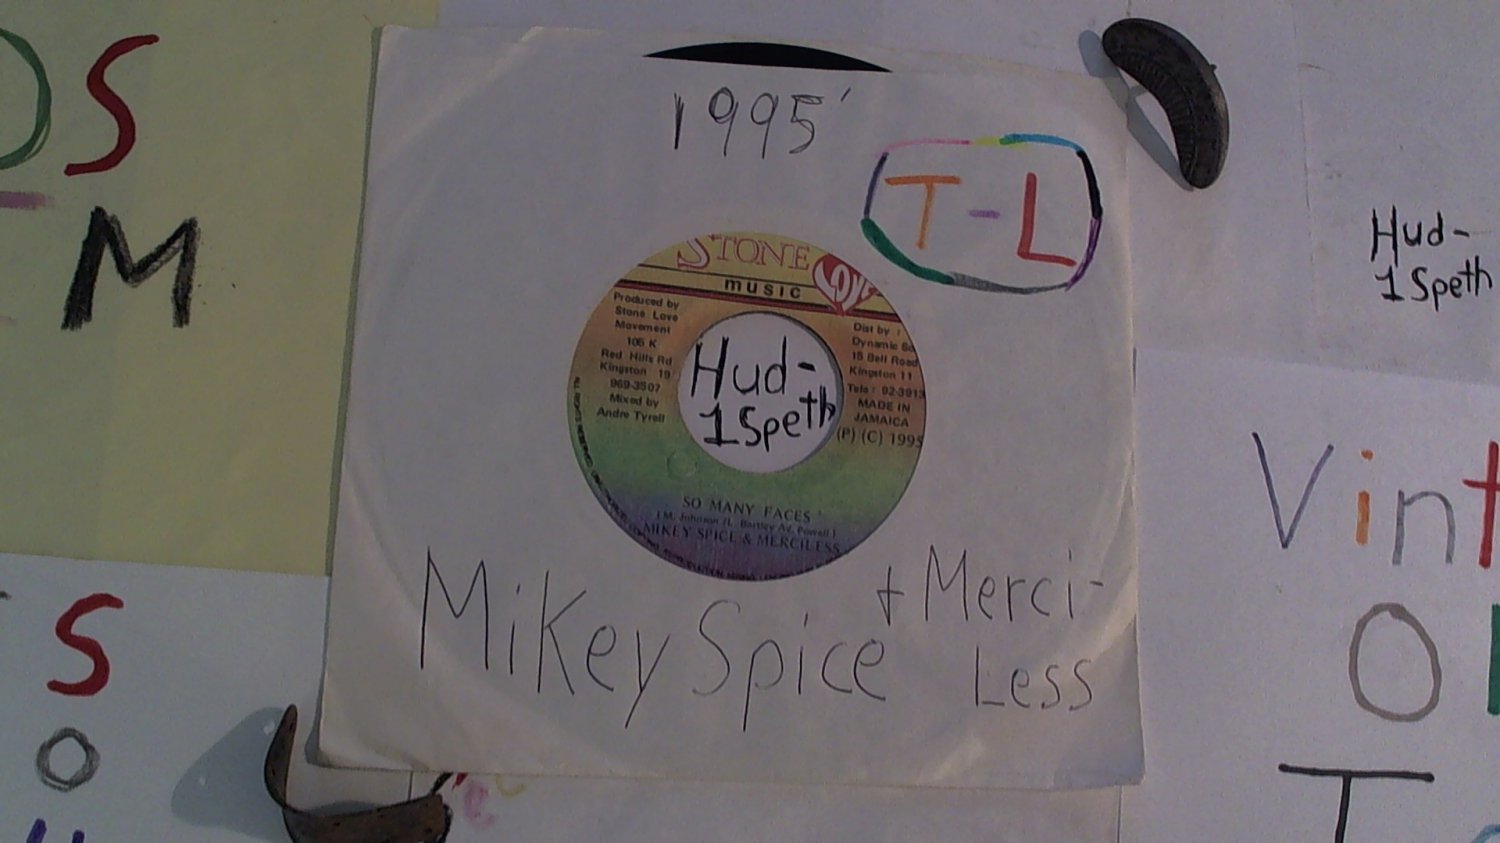 artiste: Mikey Spice & Merciless side A: So Many Faces / B: Version (Used) 7" Reggae